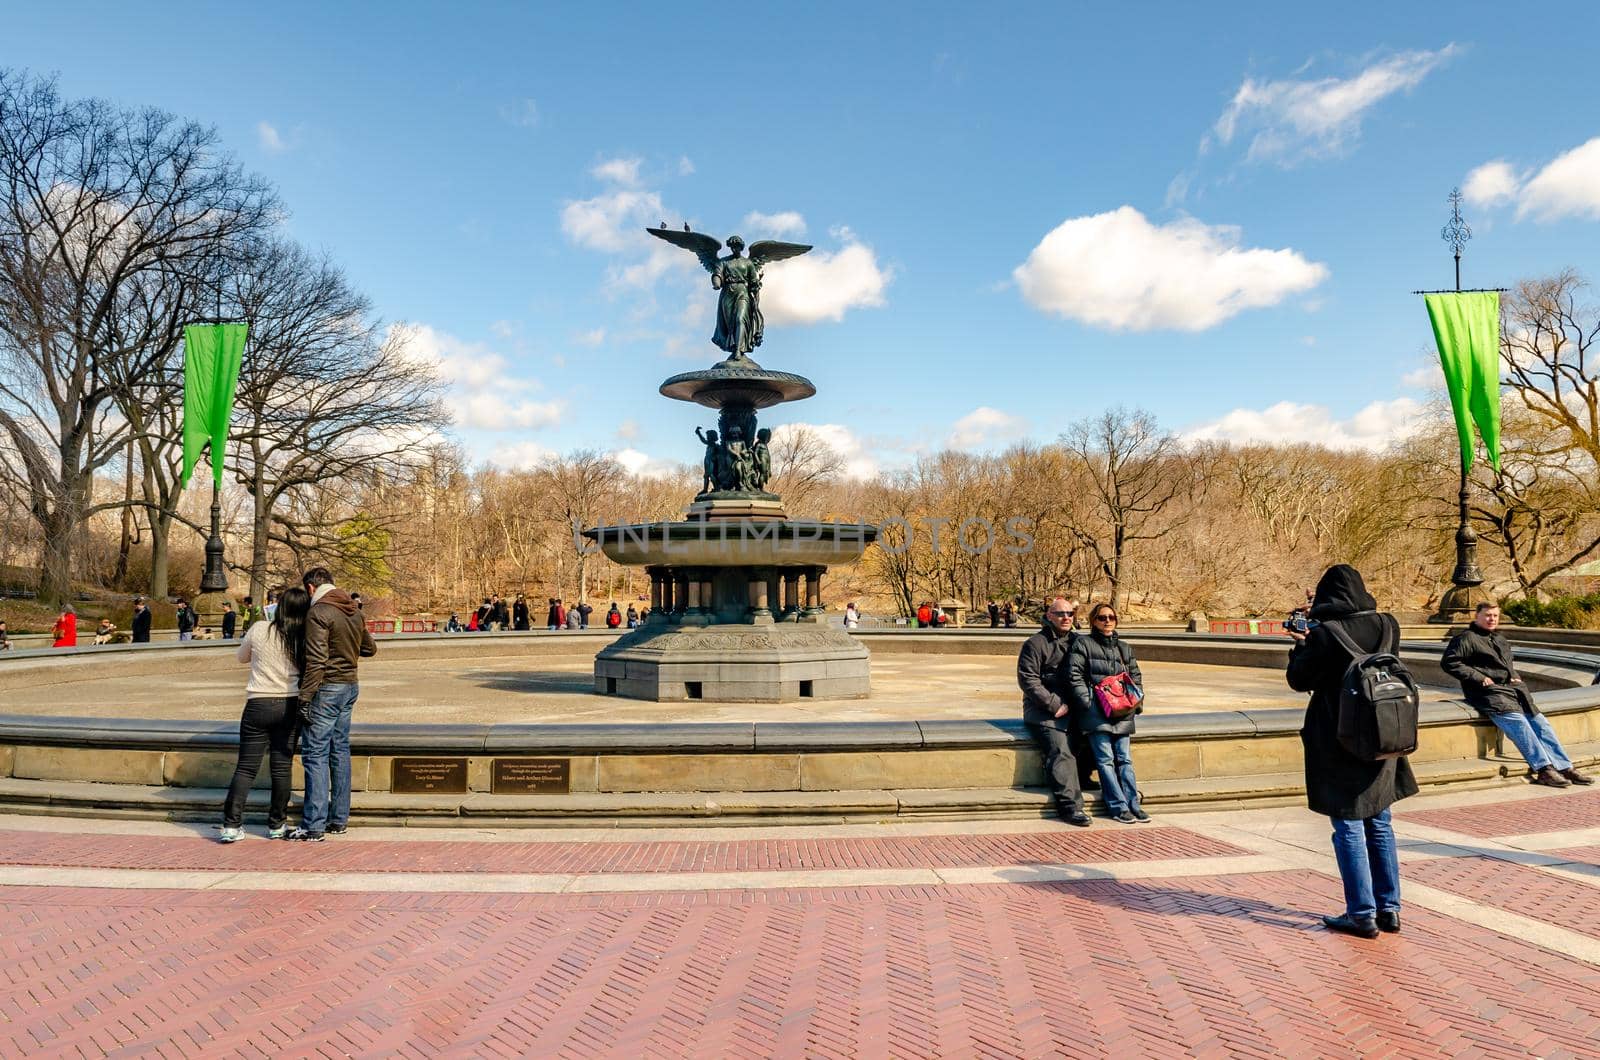 Bethesda Fountain with Angel of the Waters Sculpture, front view, Central Park New York during winter, people standing and walking around the fountain, clear sky, horizontal